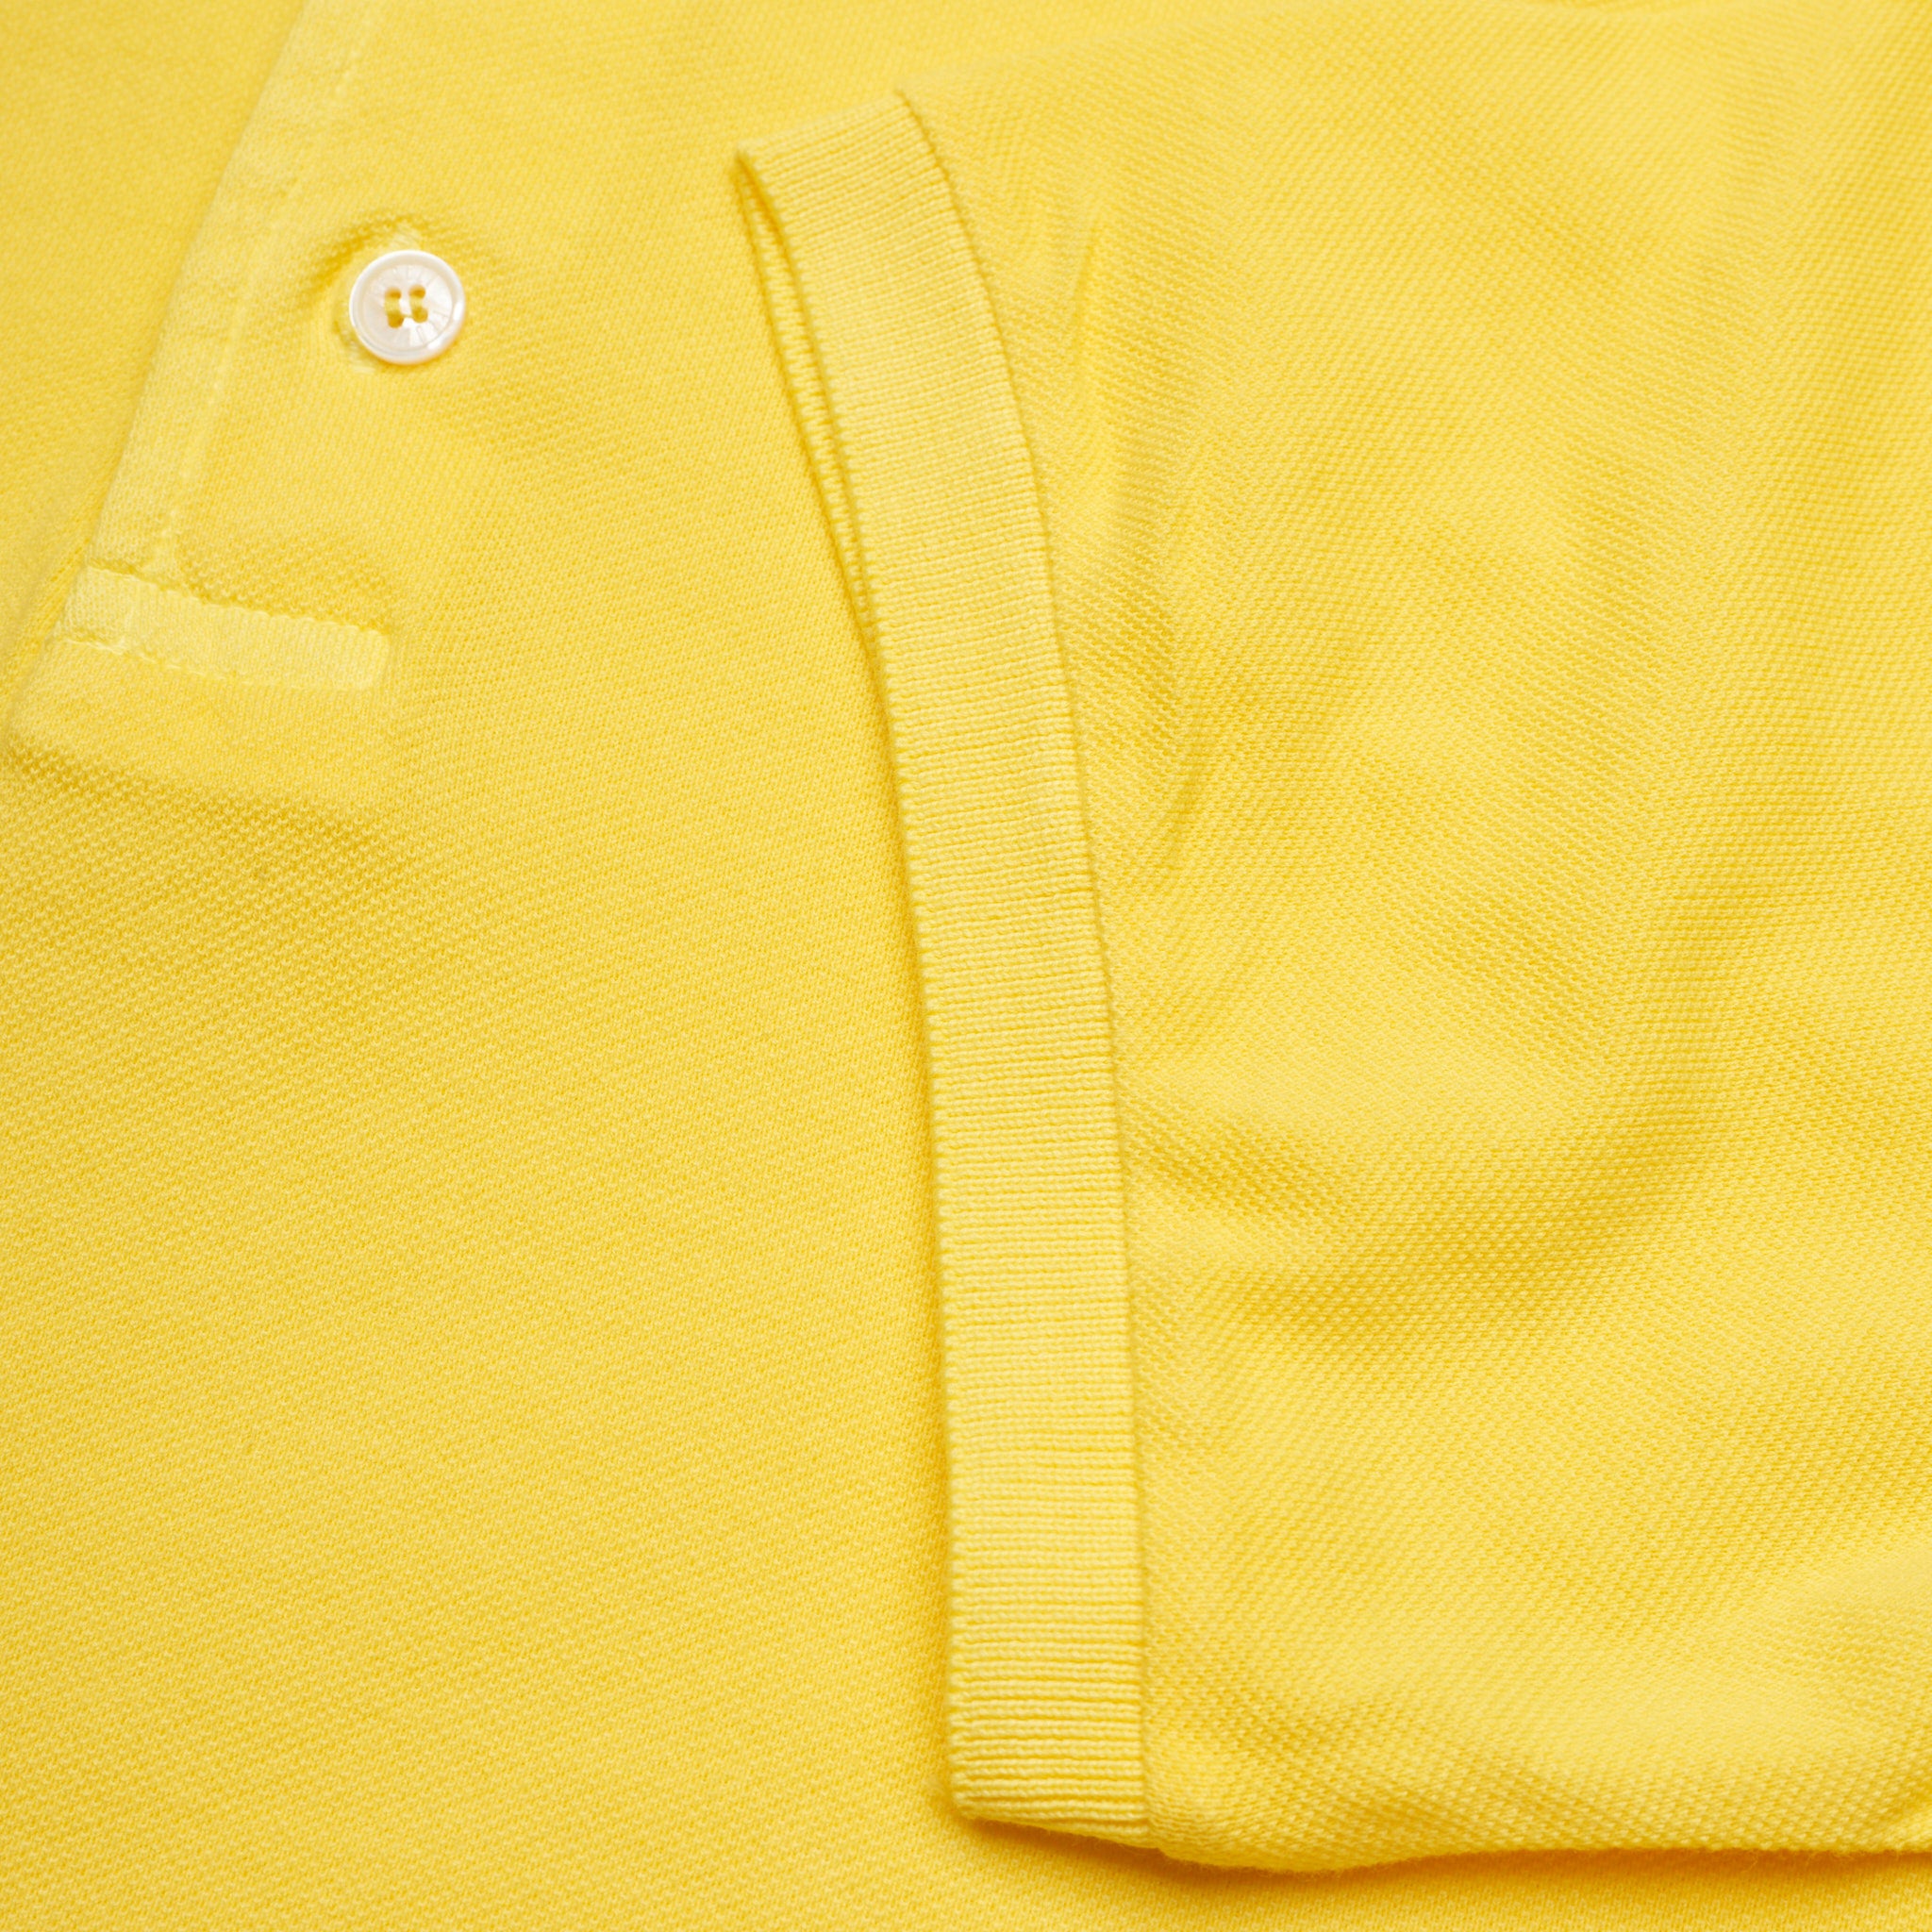 FEDELI "North" Yellow Cotton Frosted Pique Short Sleeve Polo Shirt EU 52 NEW US L